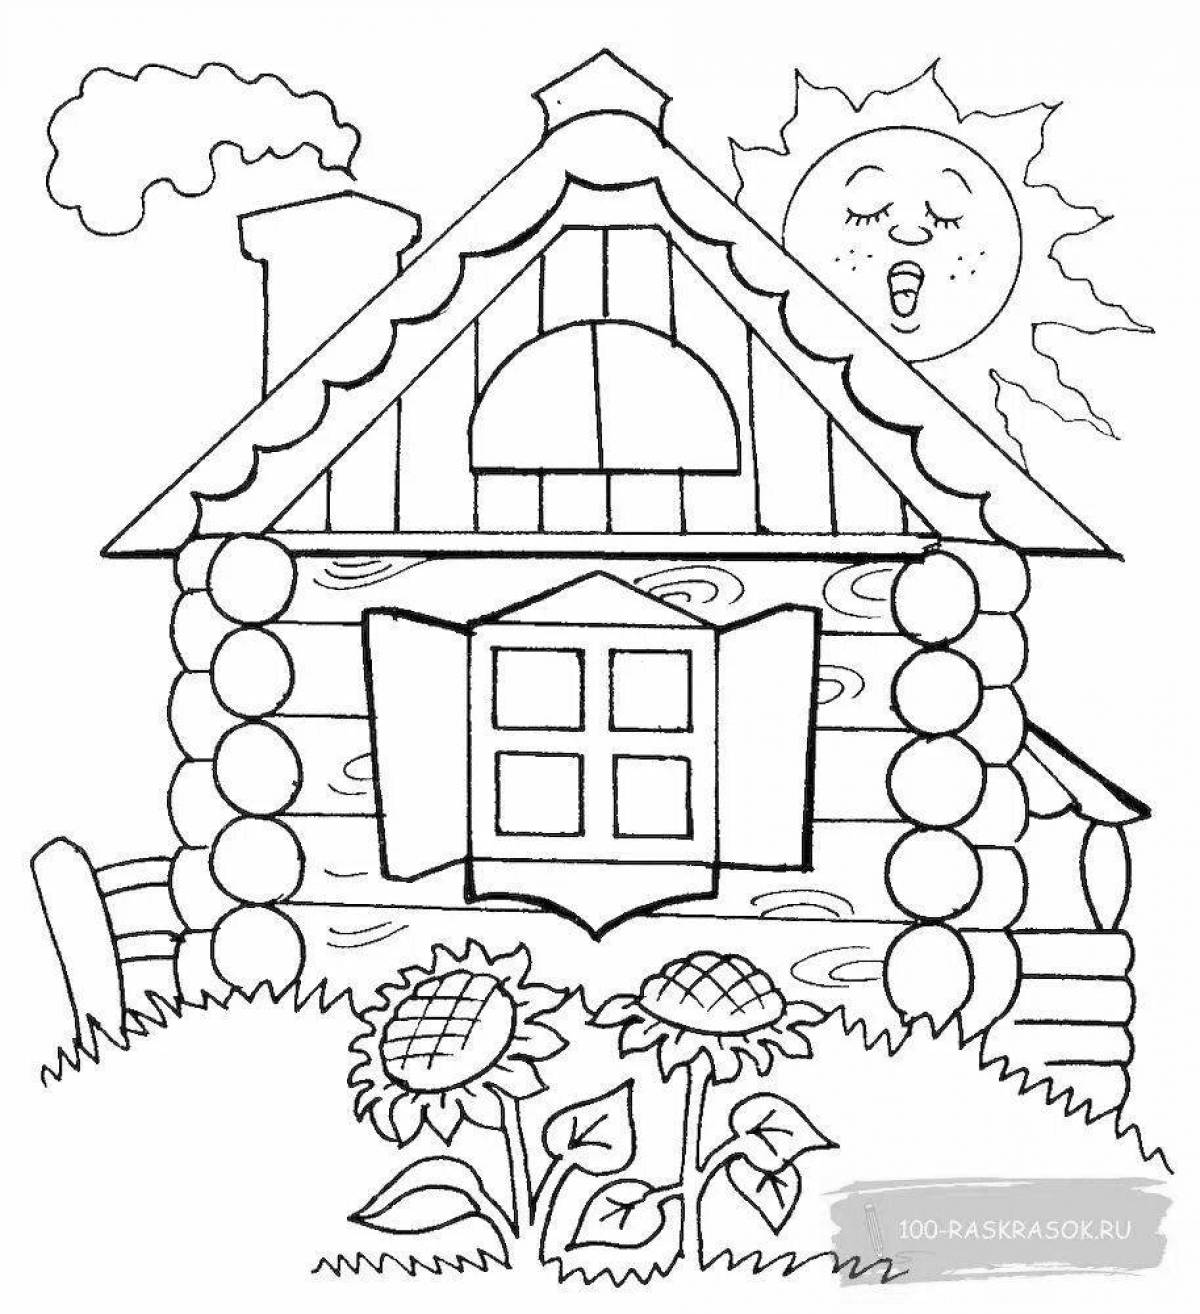 Coloring page friendly hut for kids